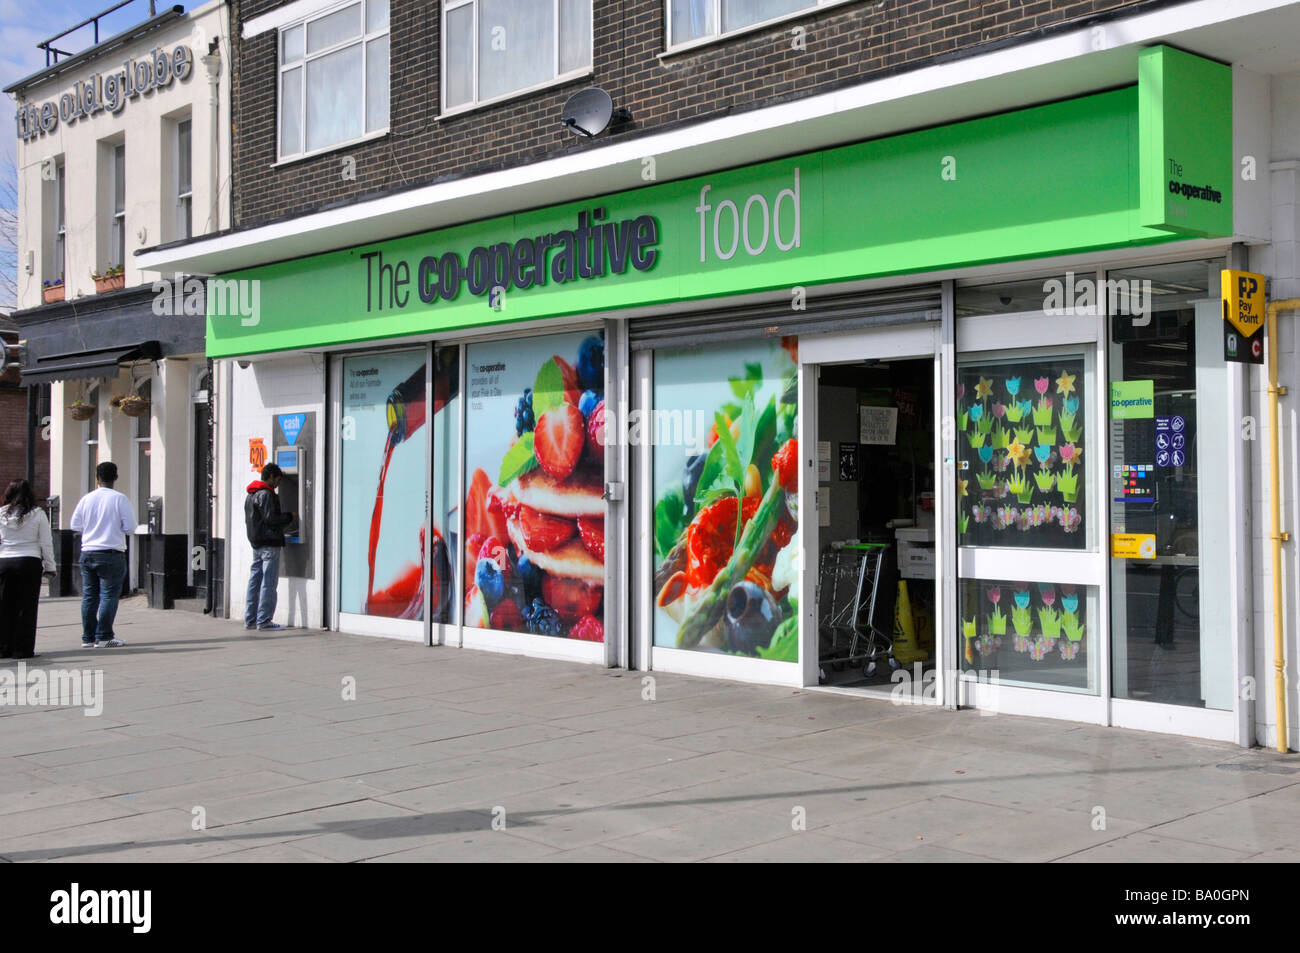 Cooperative Co op food store supermarket shop with people queuing on pavement outside at ATM hole in wall cash machine East End of London England UK Stock Photo